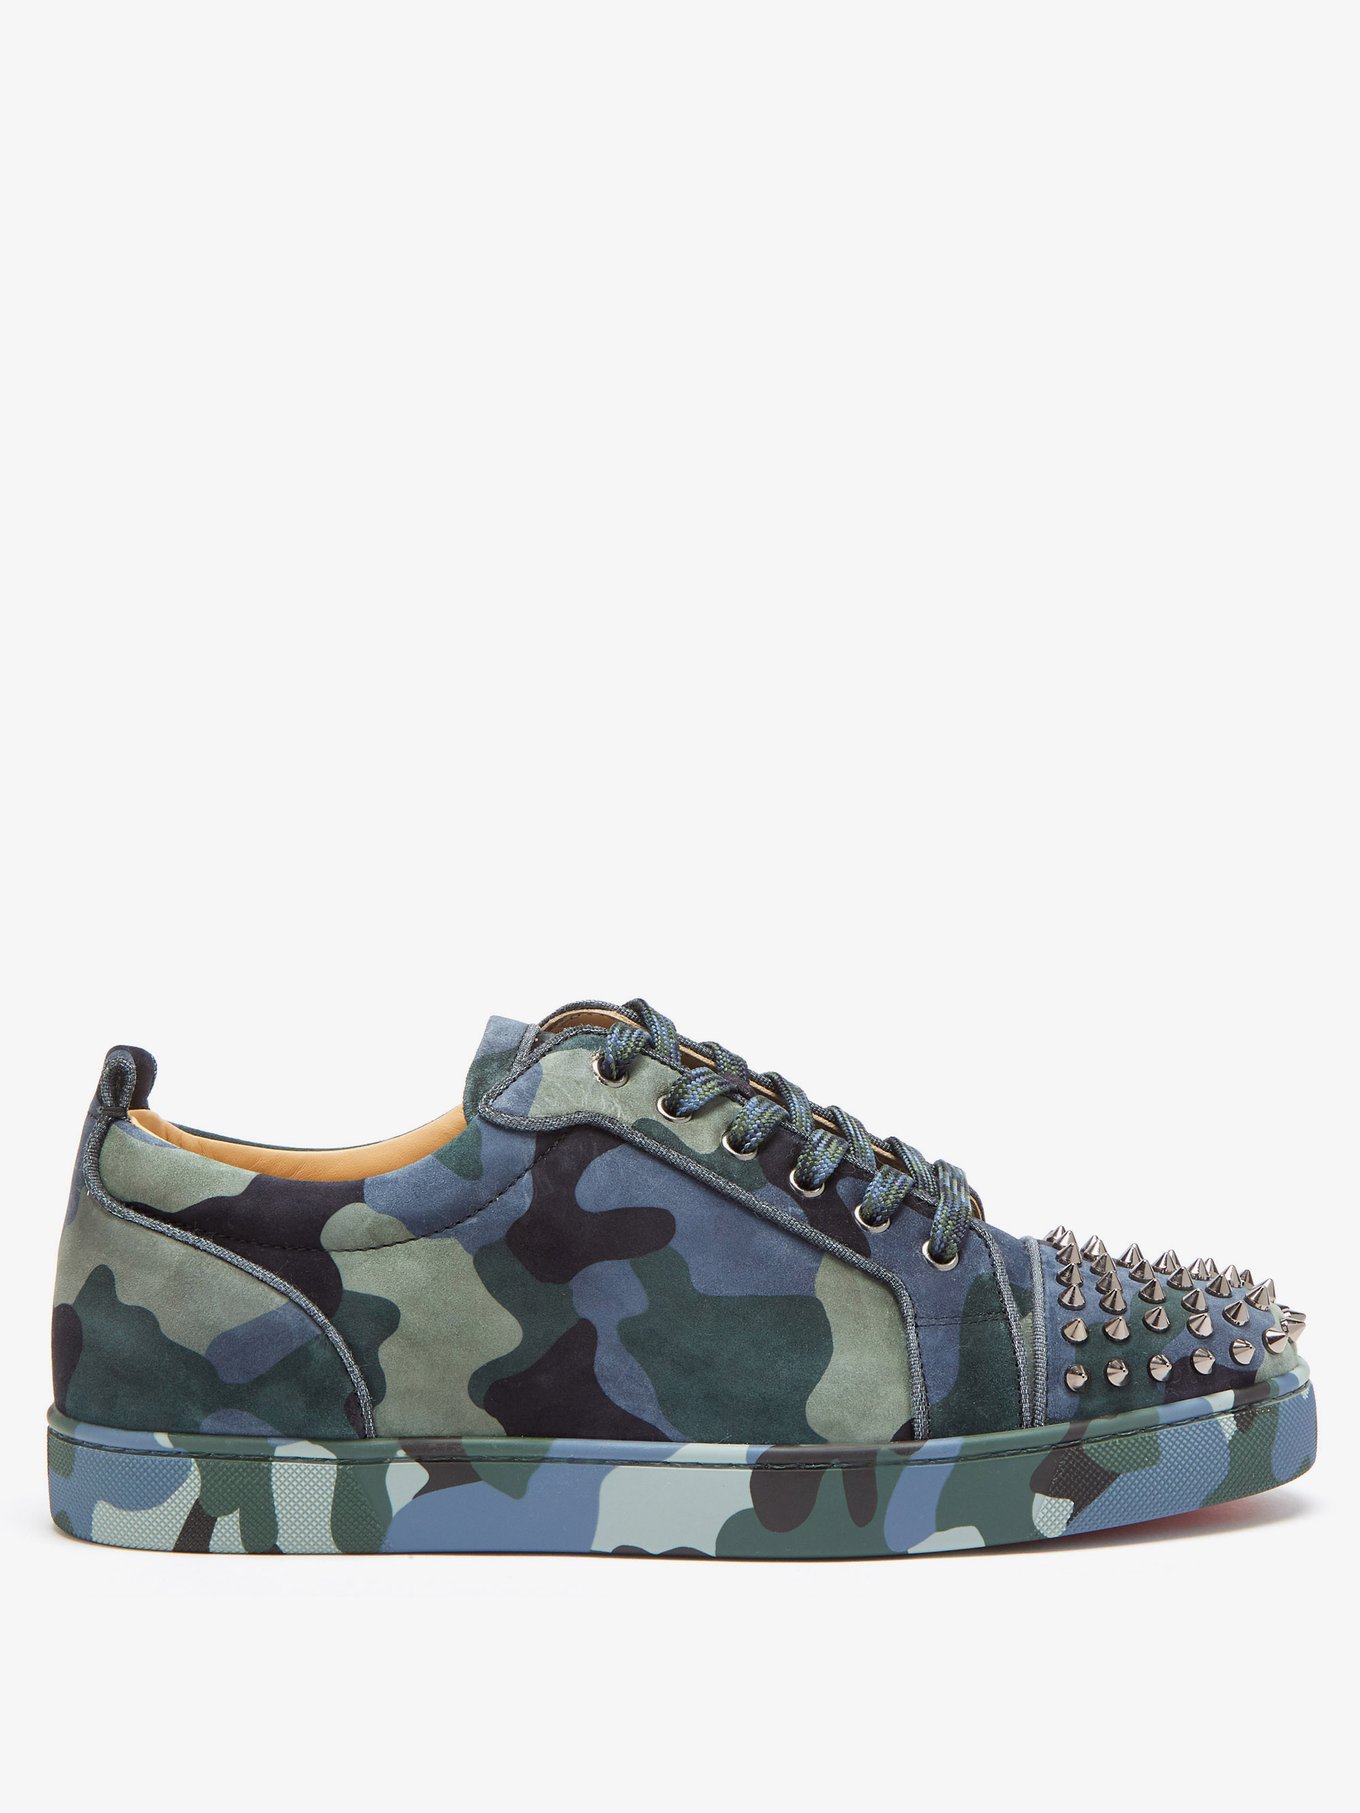 Blue Louis Junior Spikes Orlato suede trainers | Christian Louboutin | MATCHESFASHION